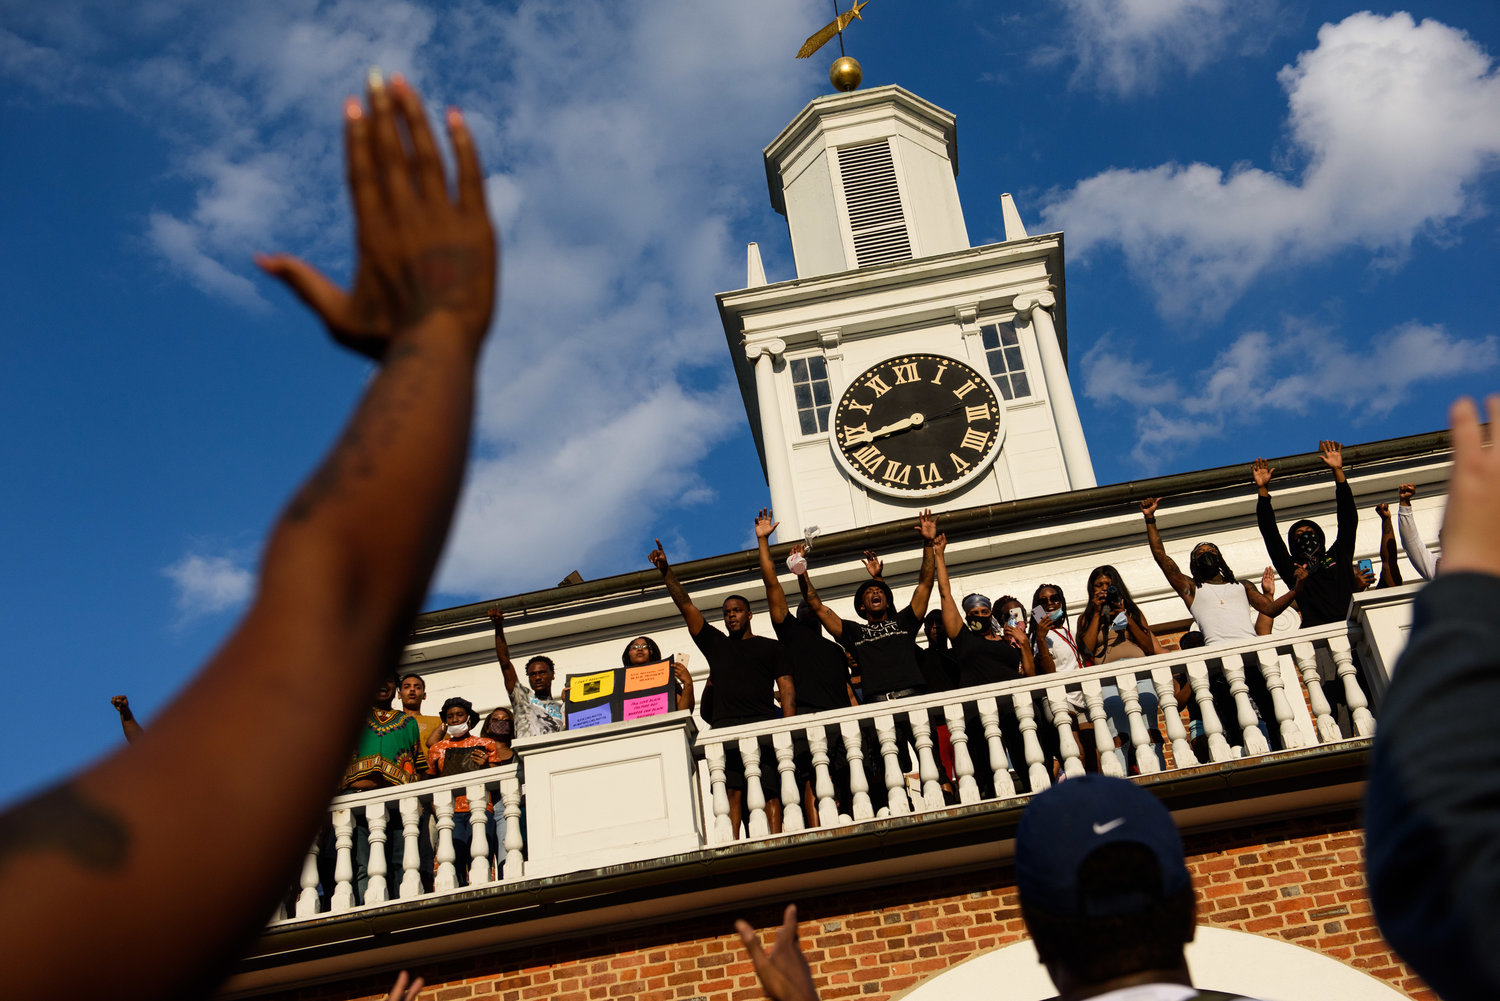 People gather on the balcony of the Market House on May 30, 2020, during a protest in the wake of George Floyd’s death. The protest later turned violent and the Market House and downtown businesses were damaged.